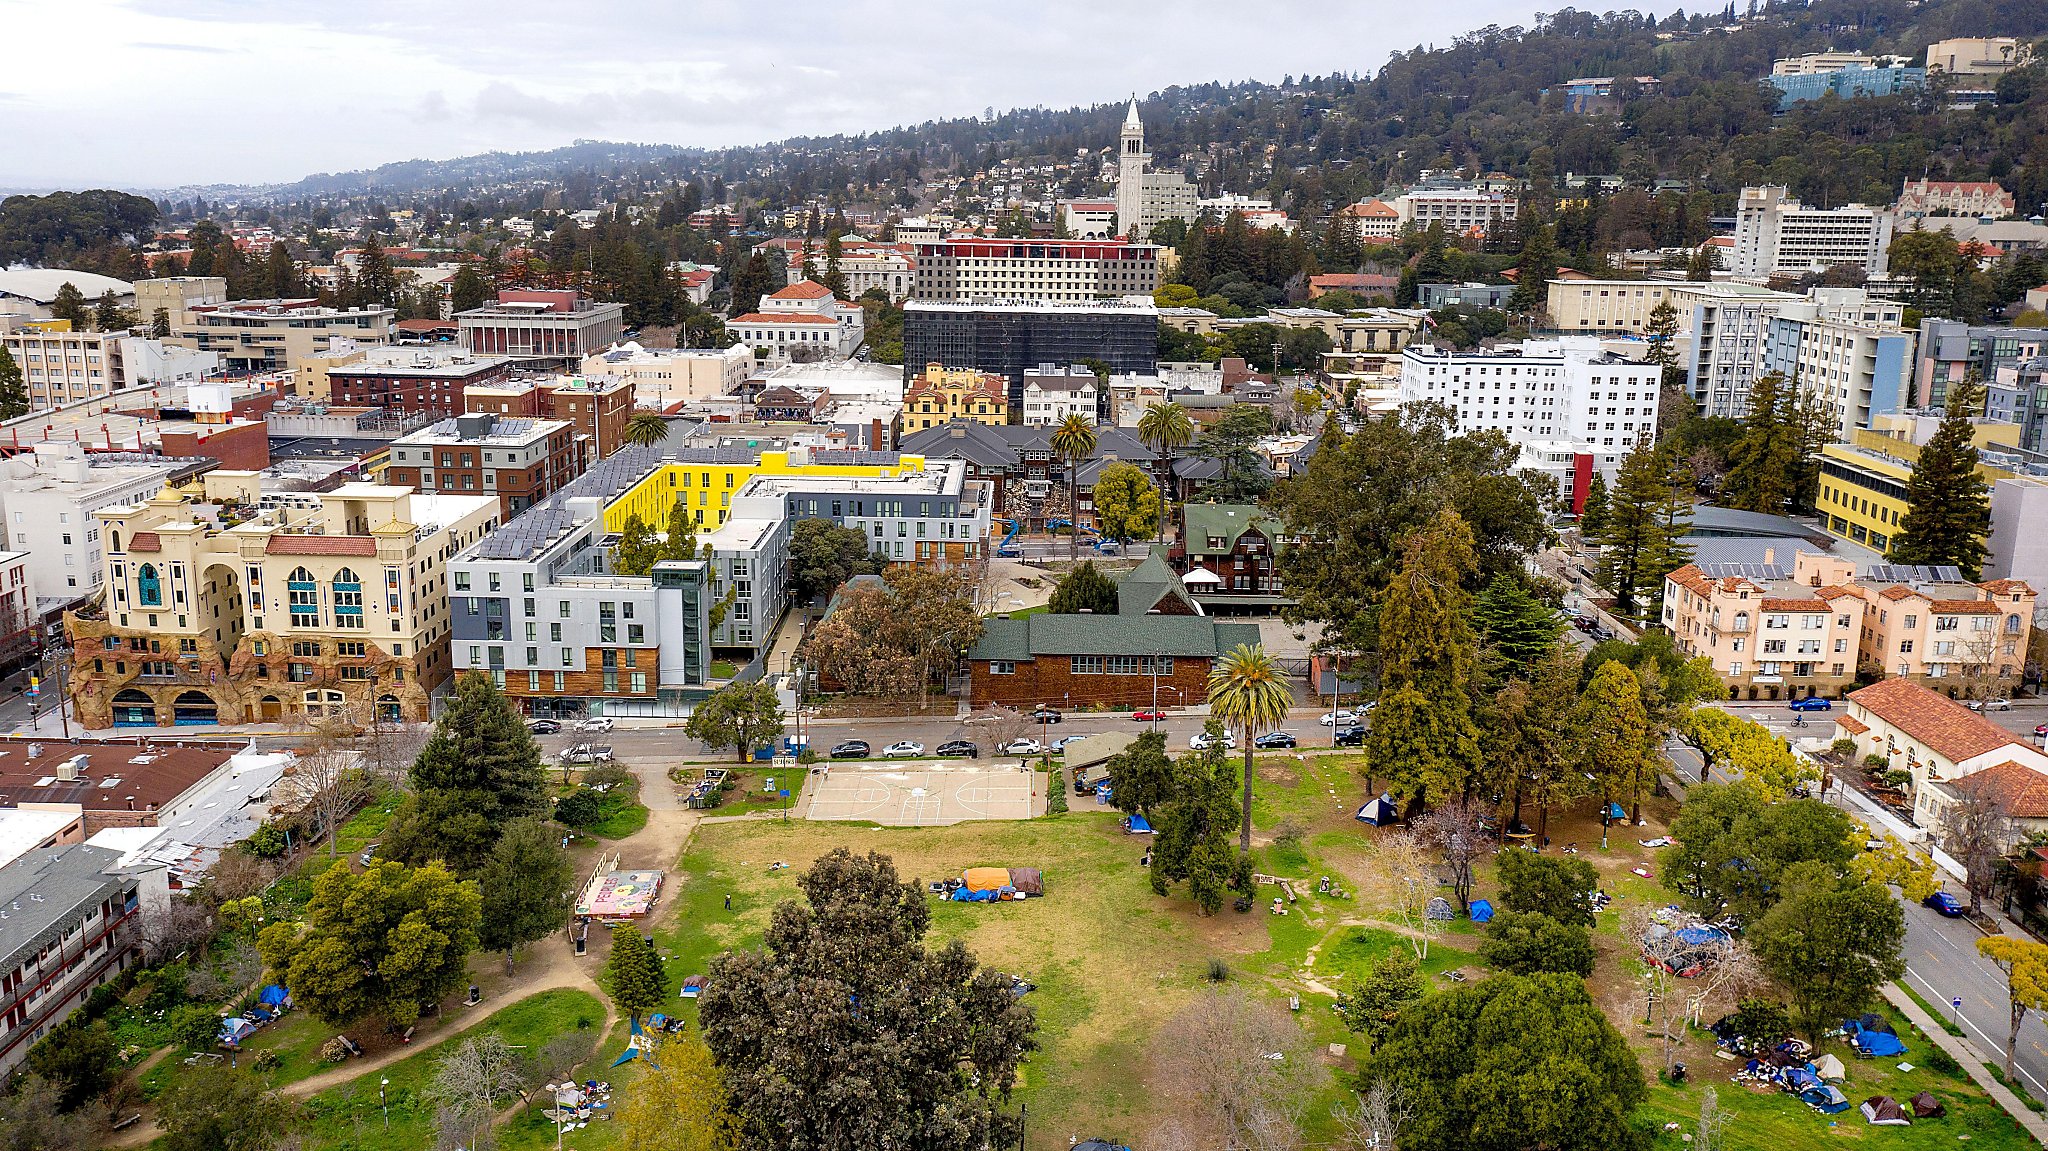 people-s-park-is-for-the-people-uc-berkeley-plan-for-housing-stirs